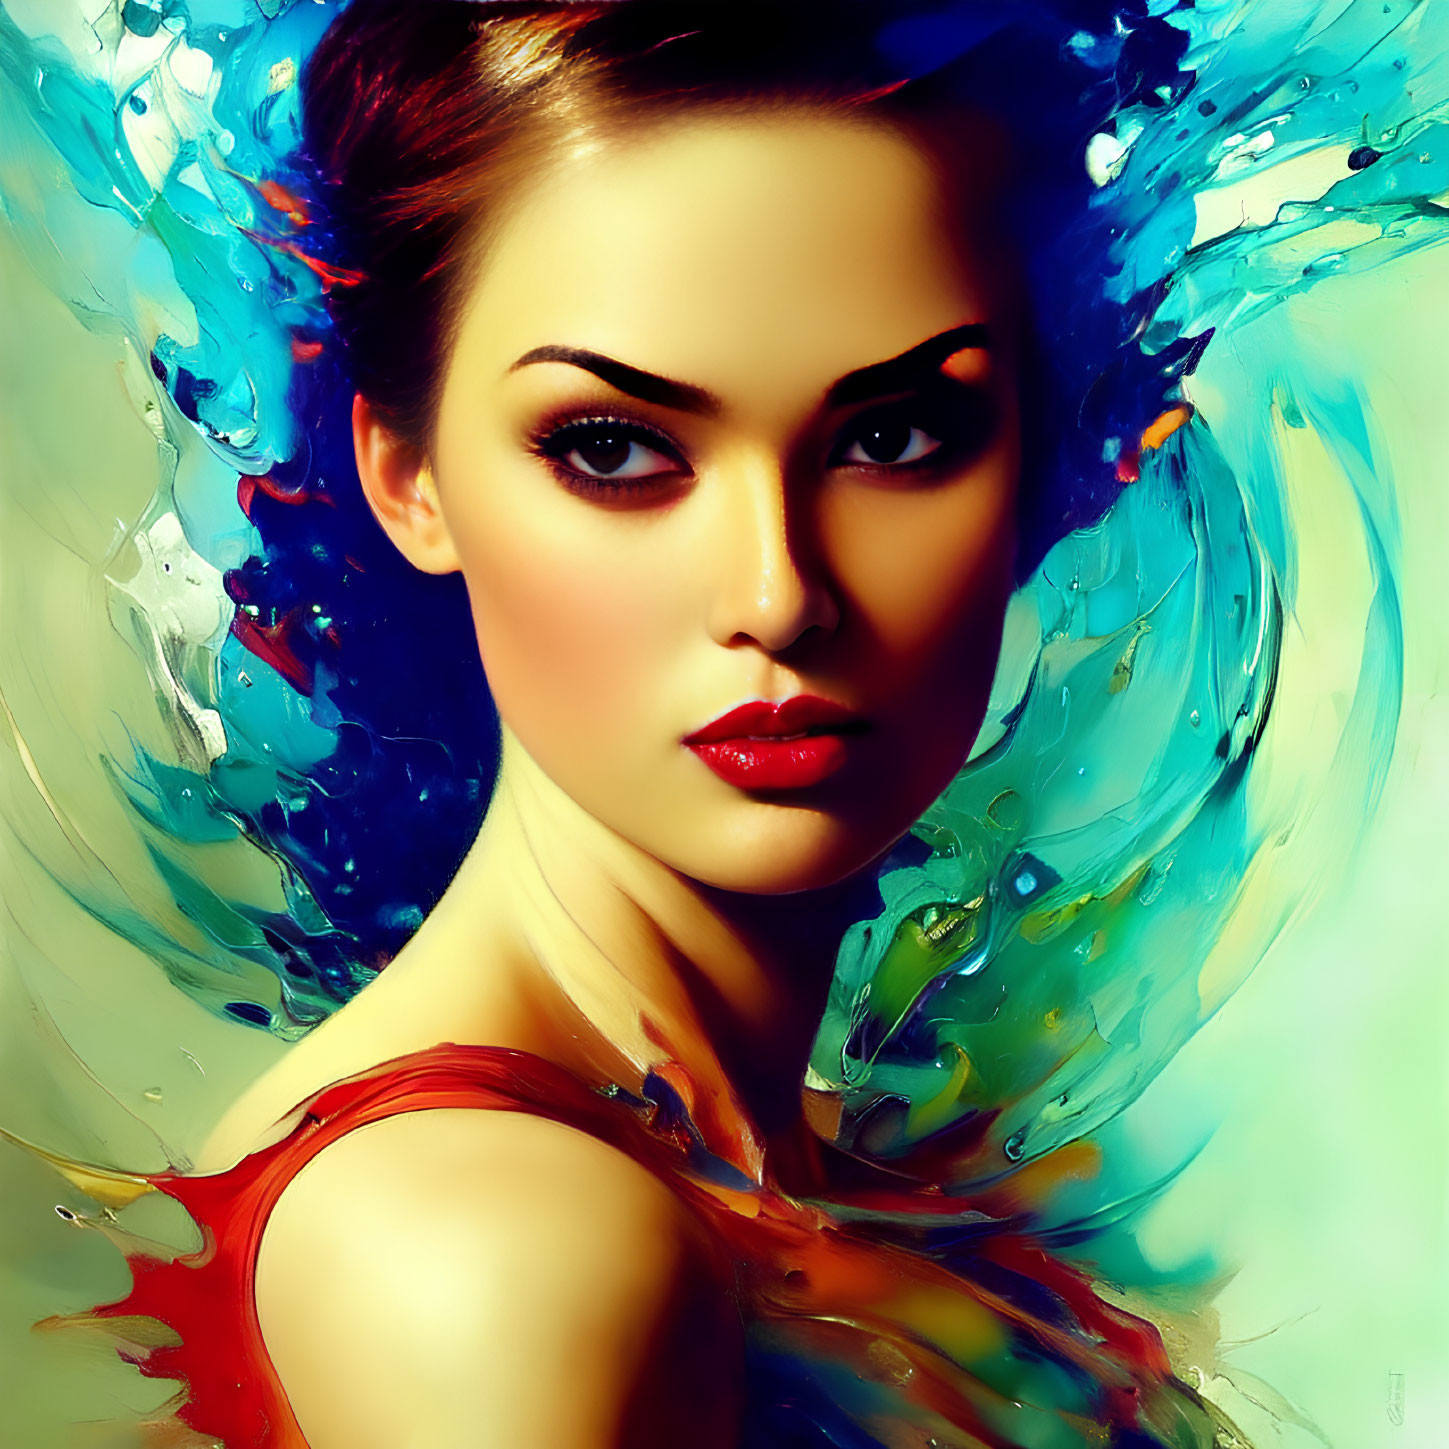 Vibrant blue and teal abstract digital artwork of a woman.